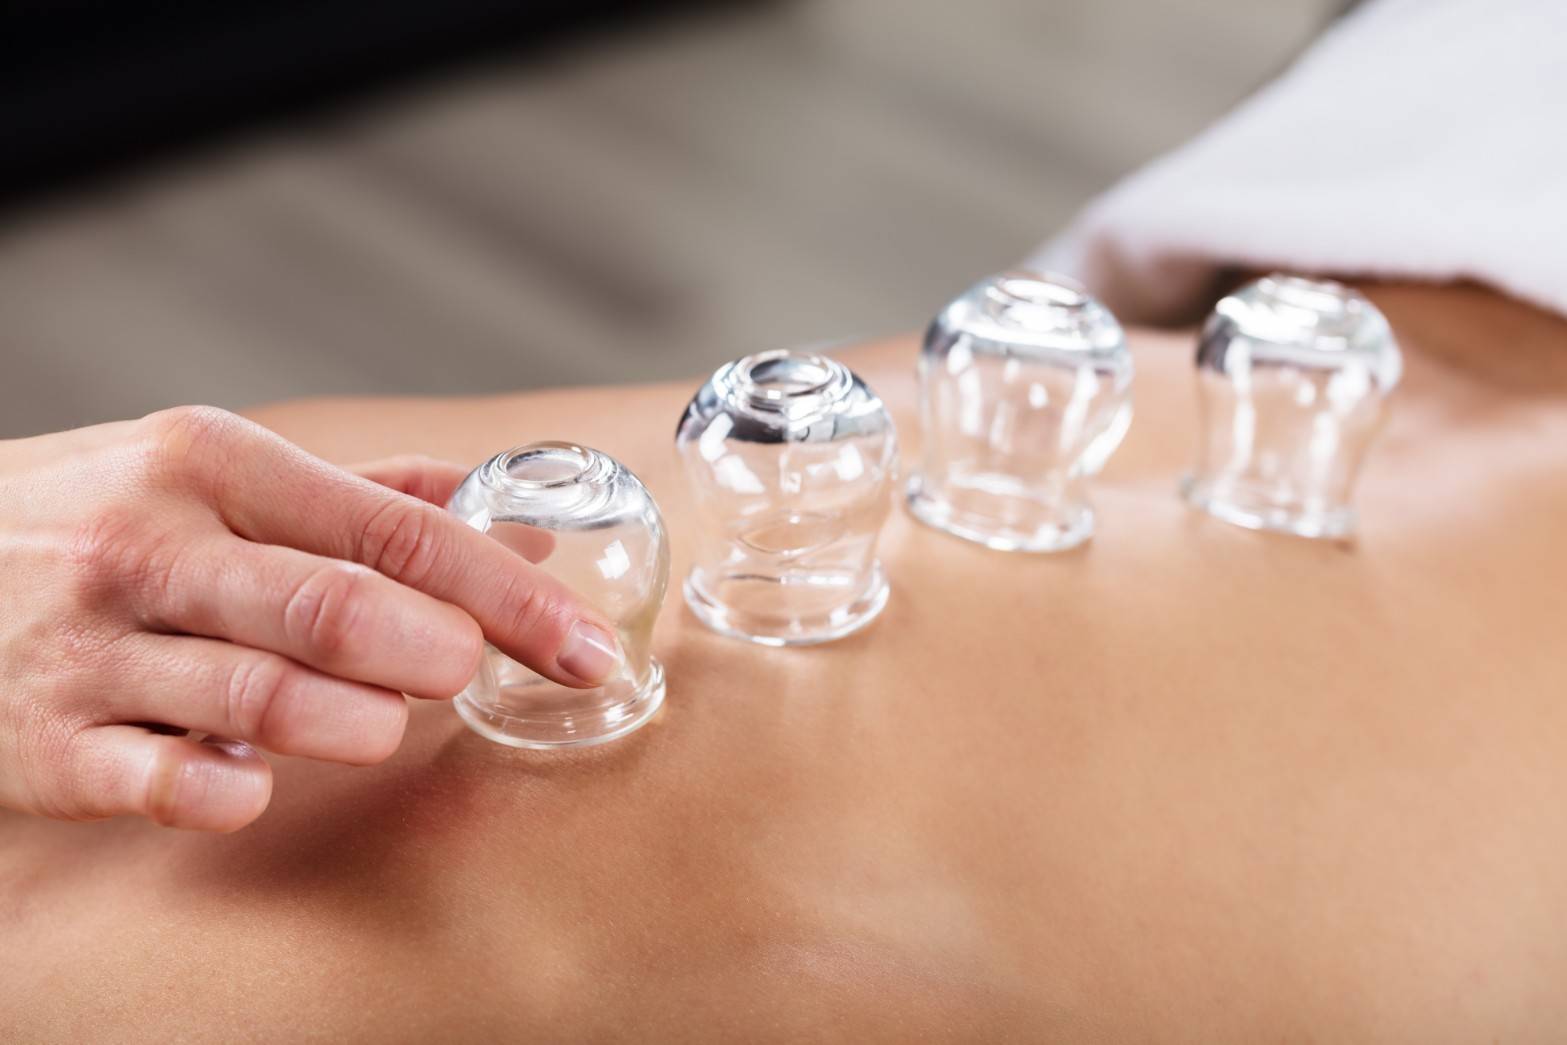 You are currently viewing การครอบแก้วและการเดินแก้ว(Cupping and Moving Cupping)คืออะไร